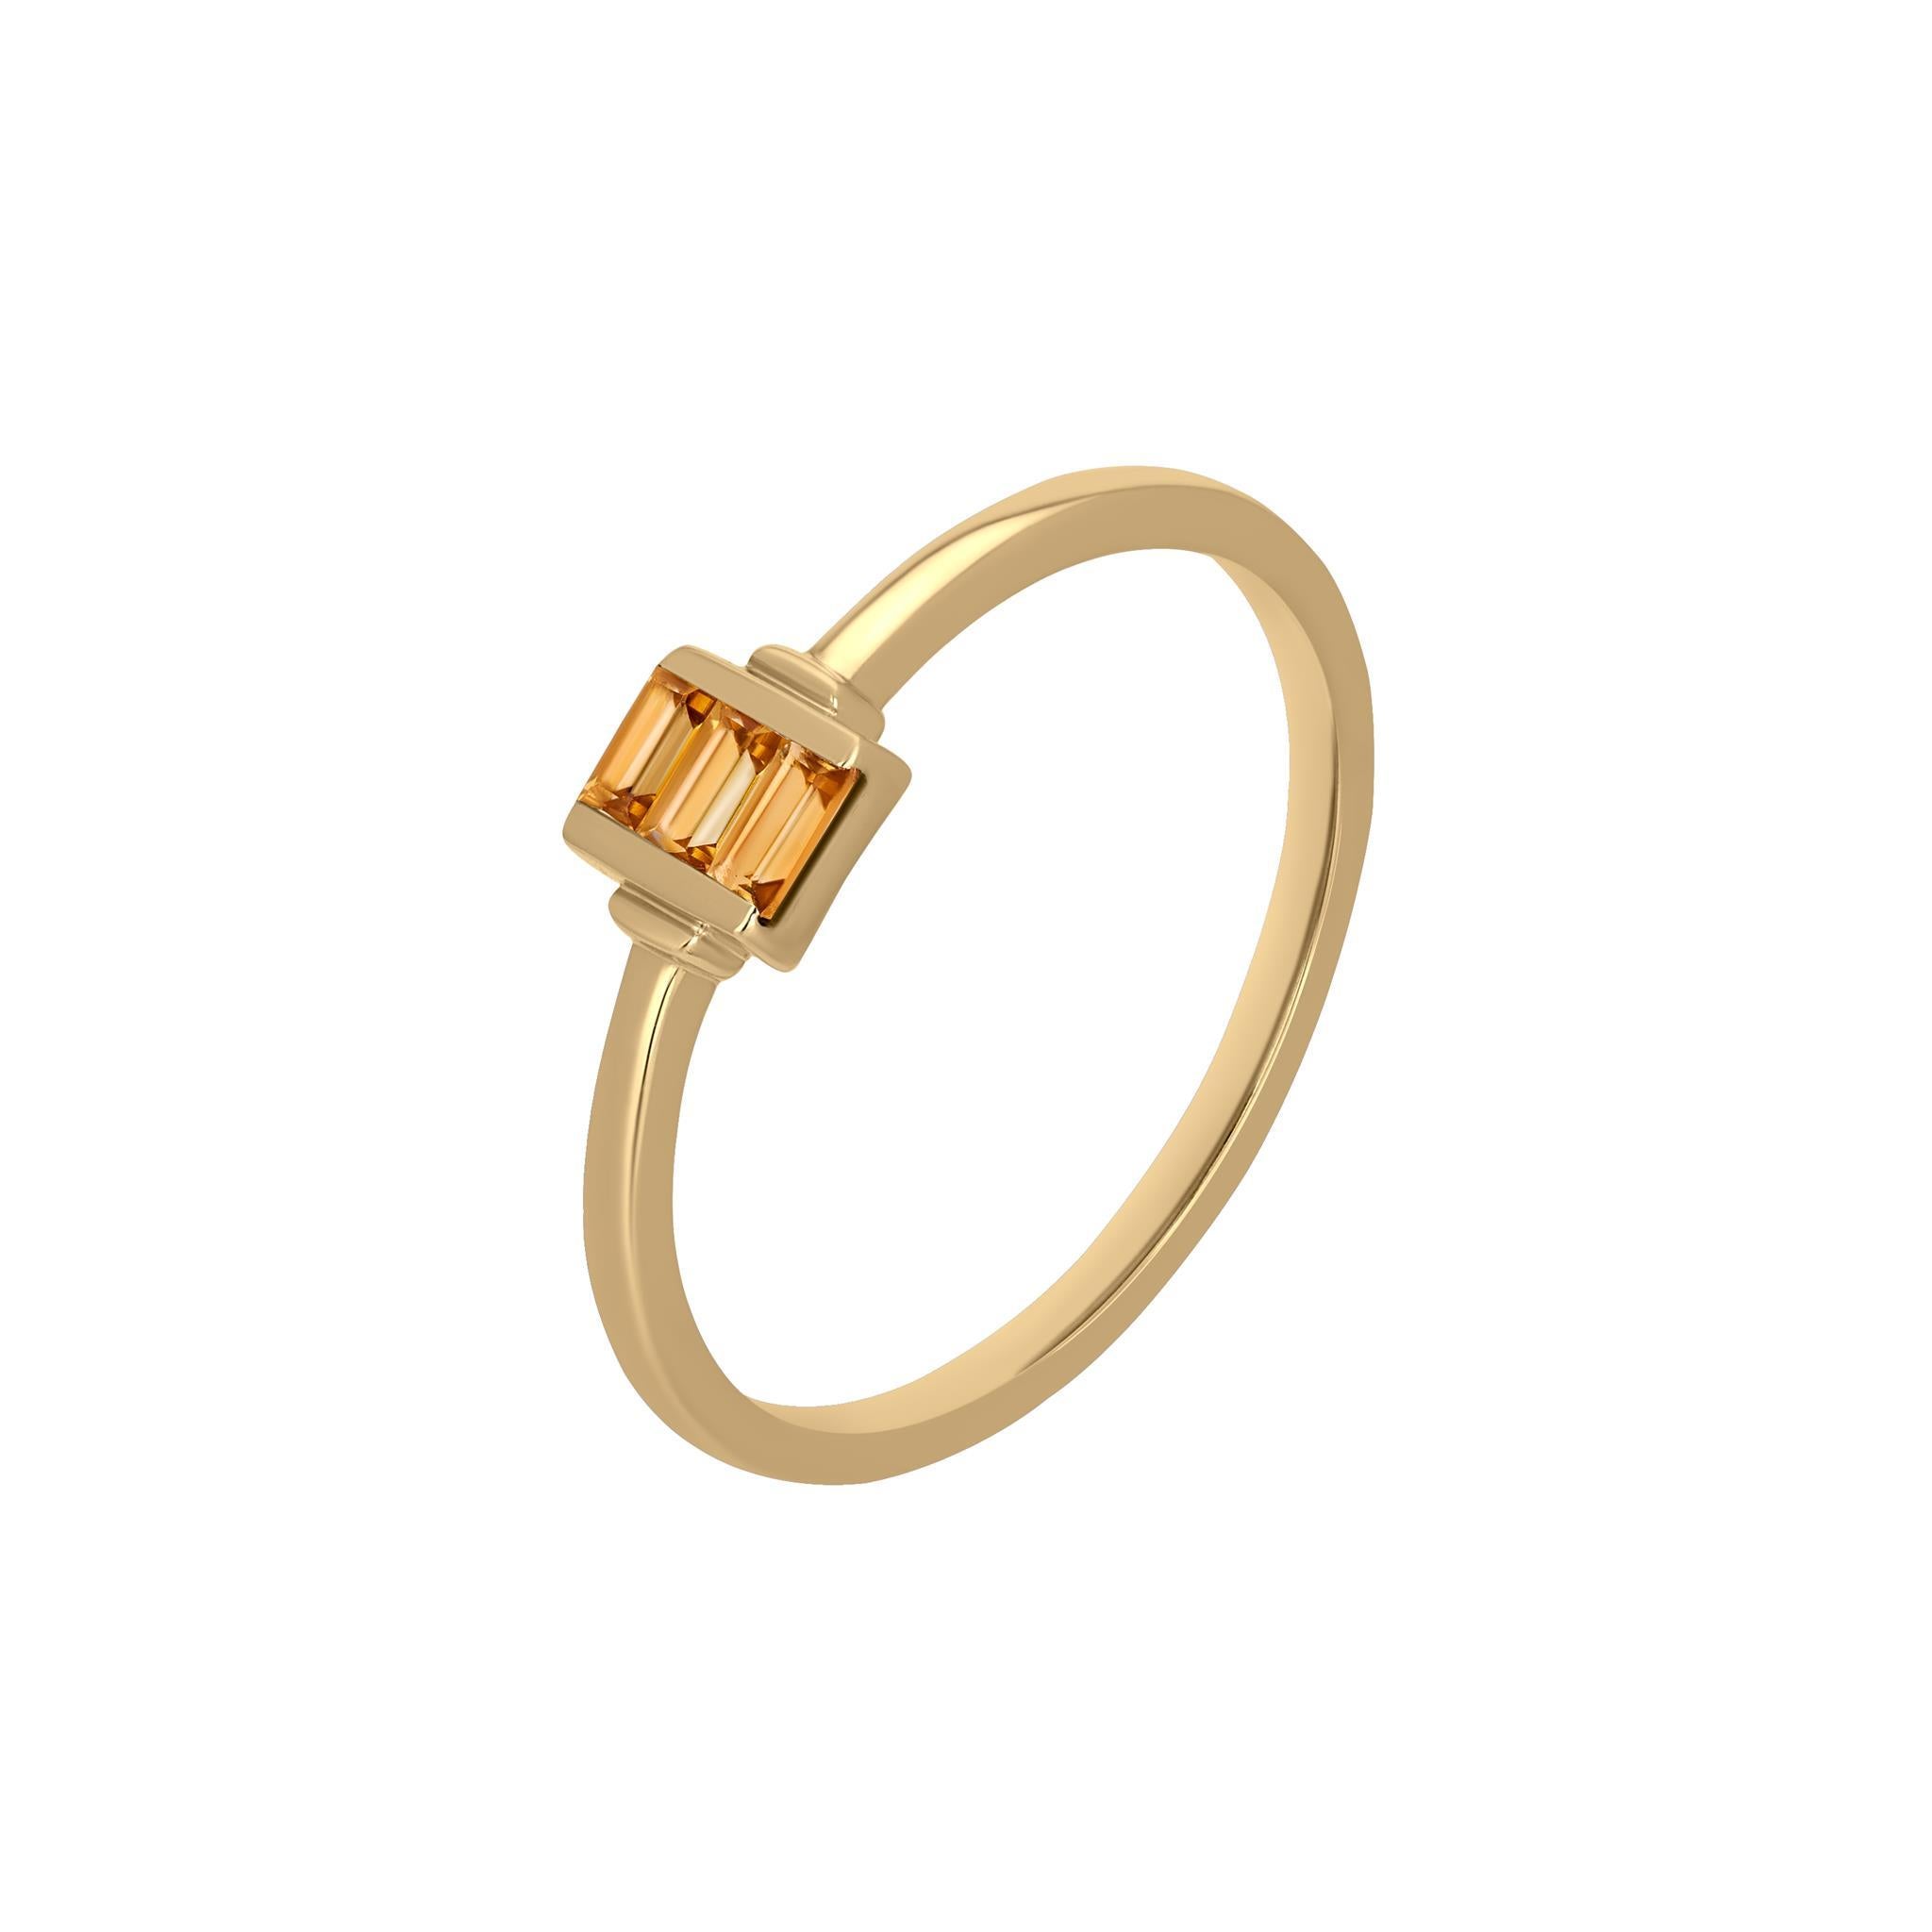 This Gemistry durable, stylish, and simple band ring is made up of baguette-cut citrine on an 14K Yellow Gold body. the citrine weighs 0.14 Cts. Sleek, and sober, this goes well with young adults who like to keep things artistically simple. Having a